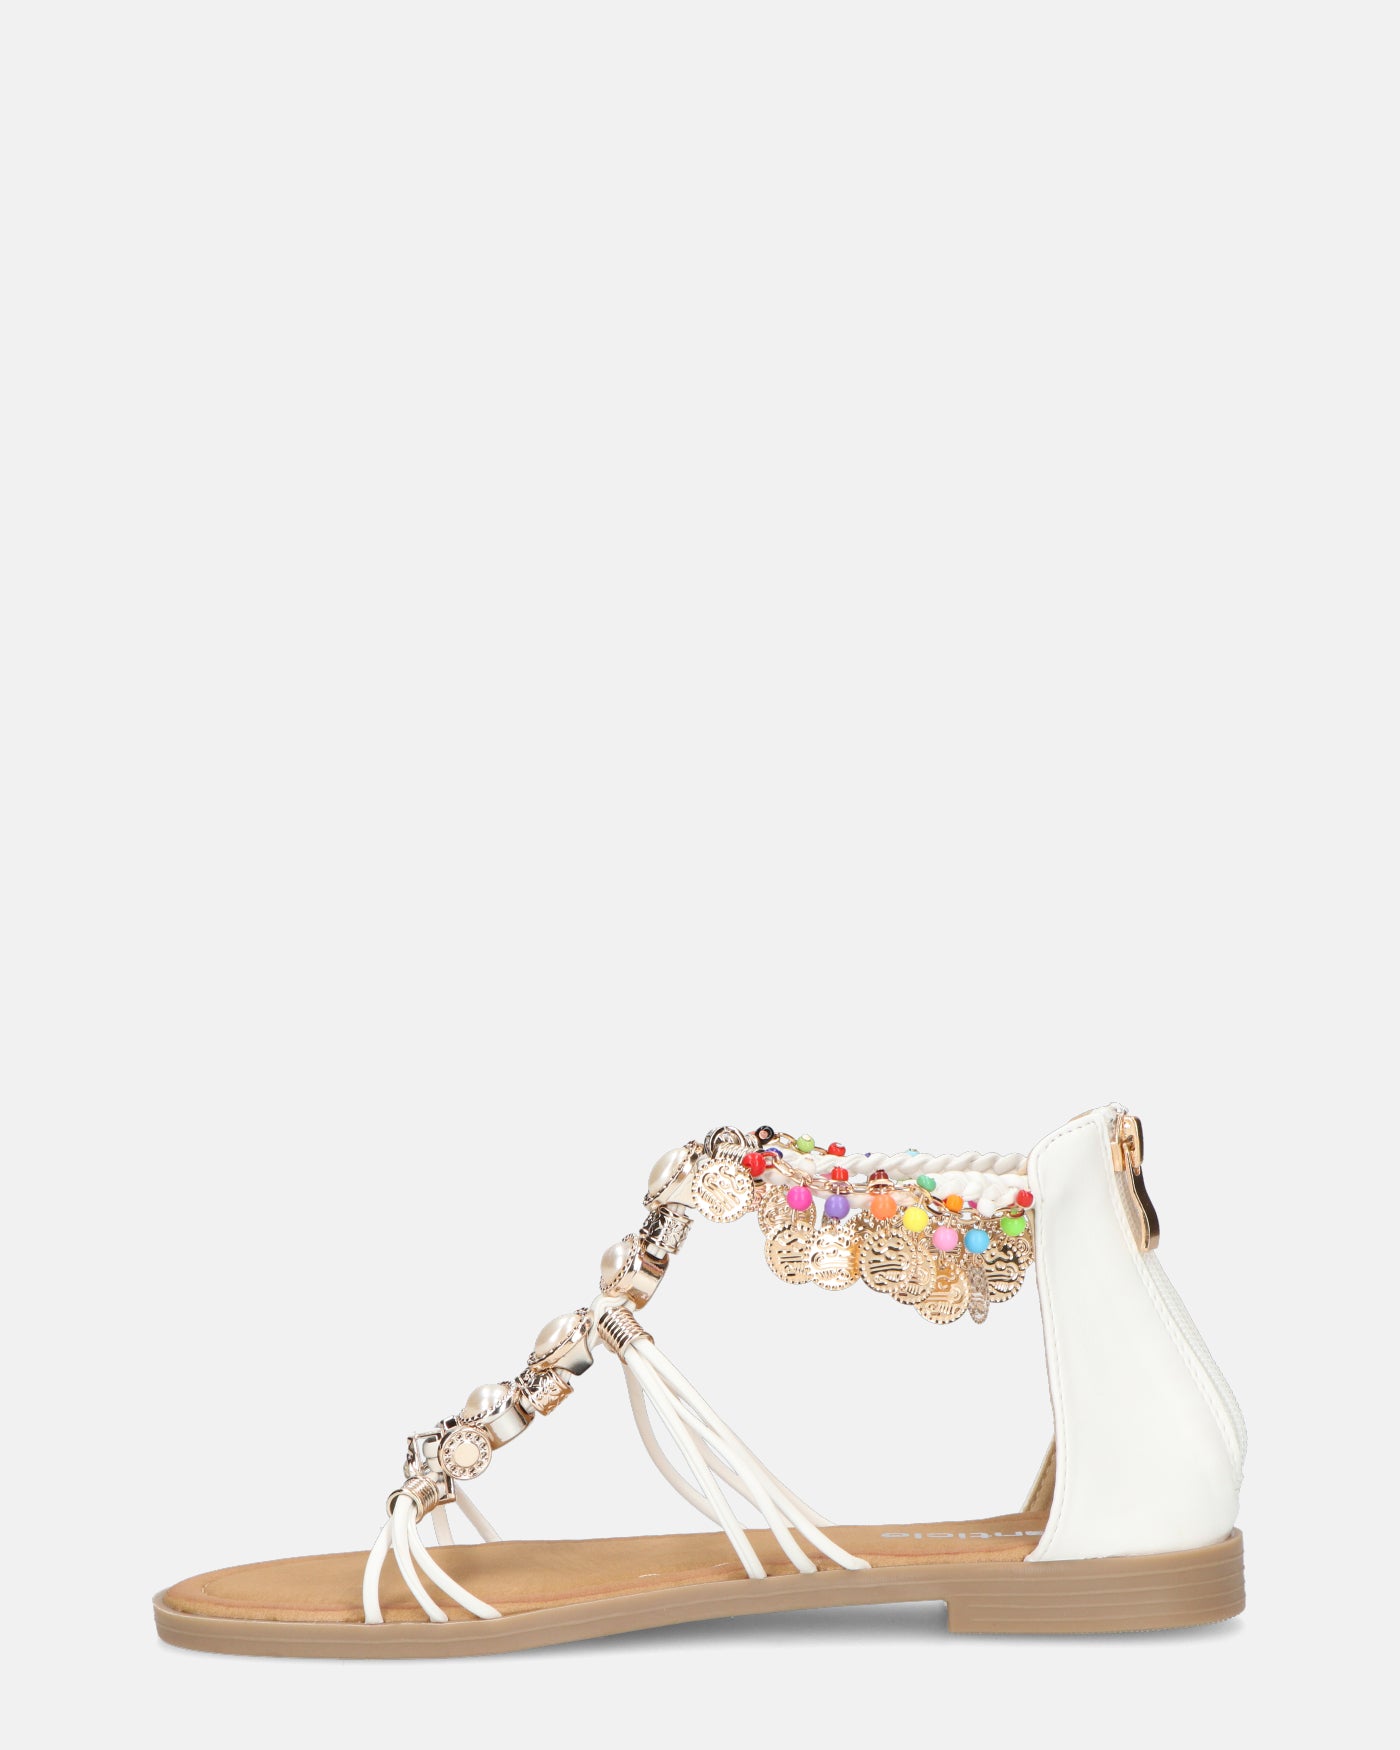 PAULA - beige open sandals with white zip and colored gems